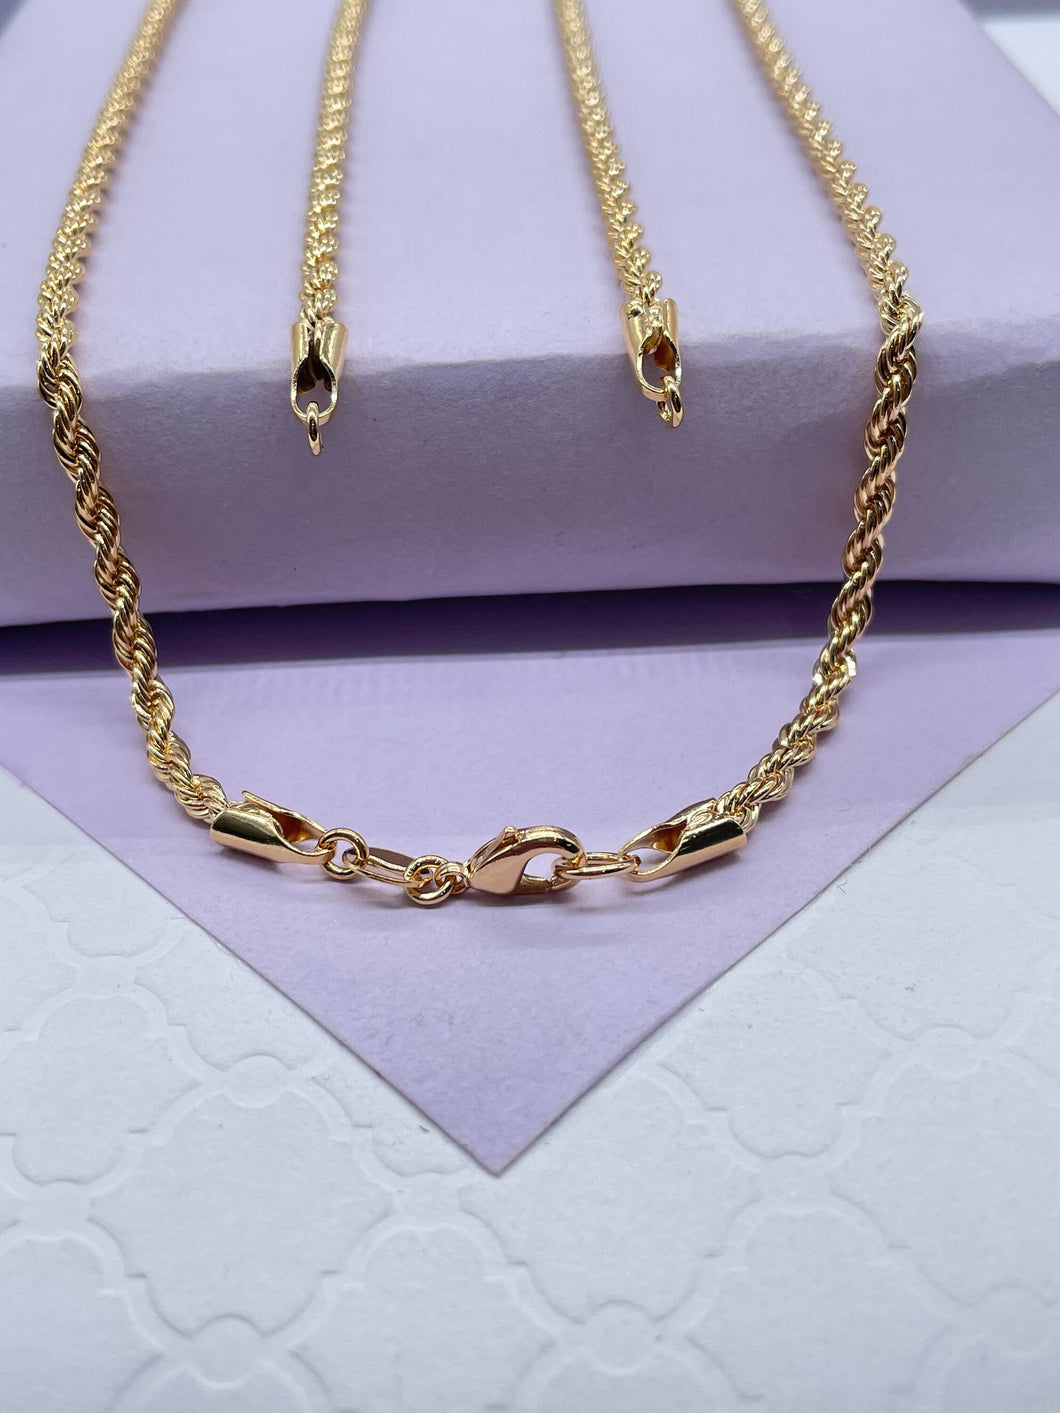 18k Gold Filled Open End- Rope Chain for Jewelry Making, Name Plaque Chain, Easy to Make your own Style